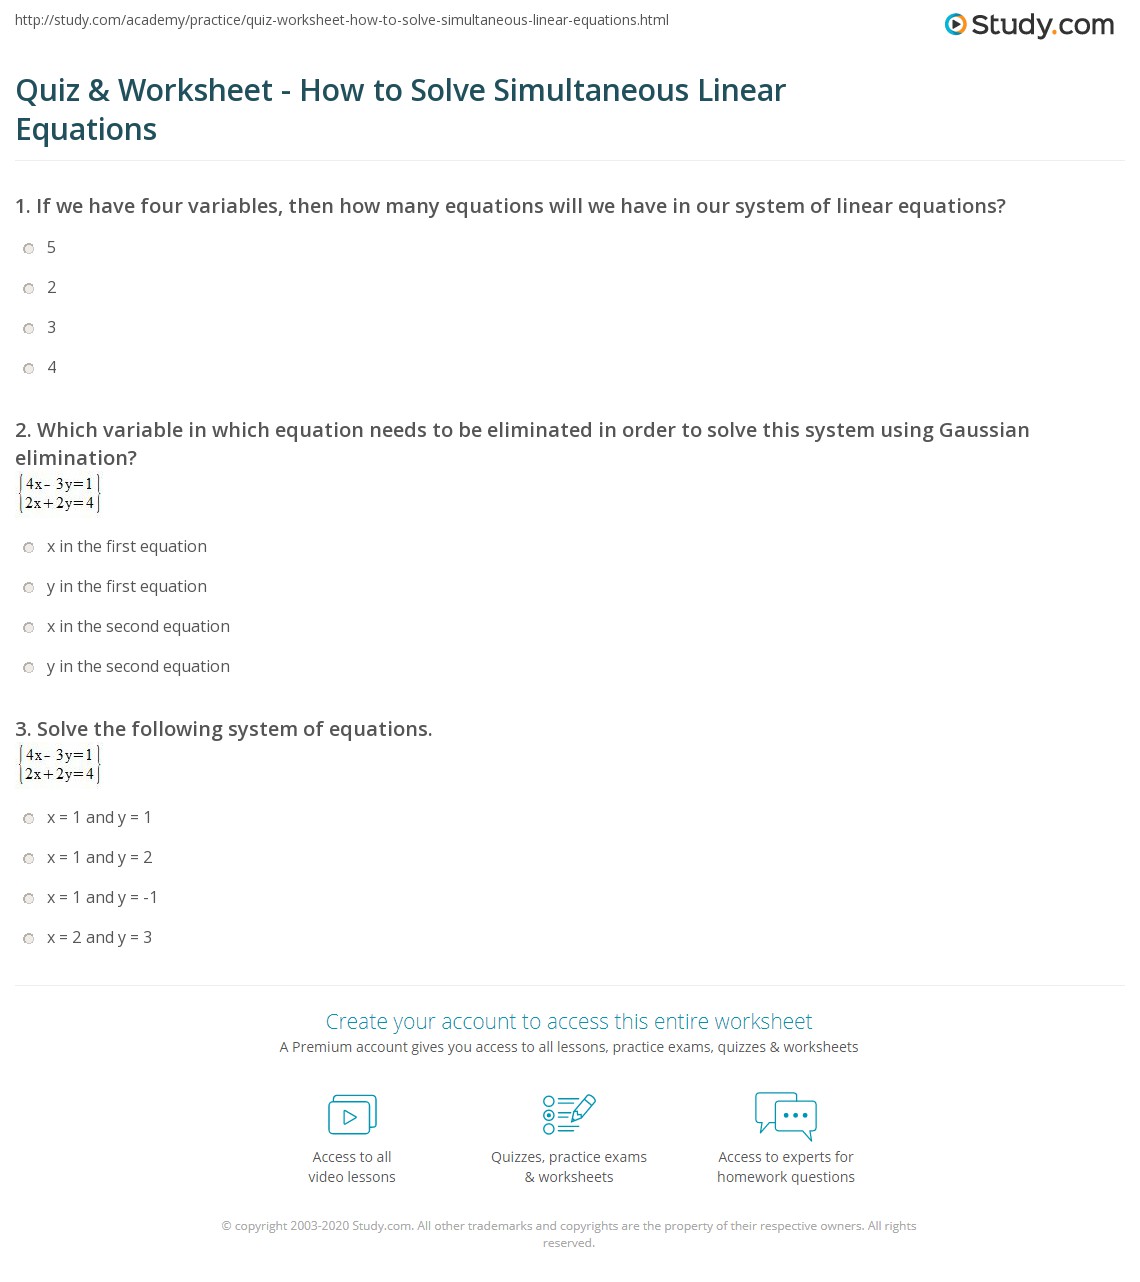 how to solve simultaneous equations with 3 variables pdf